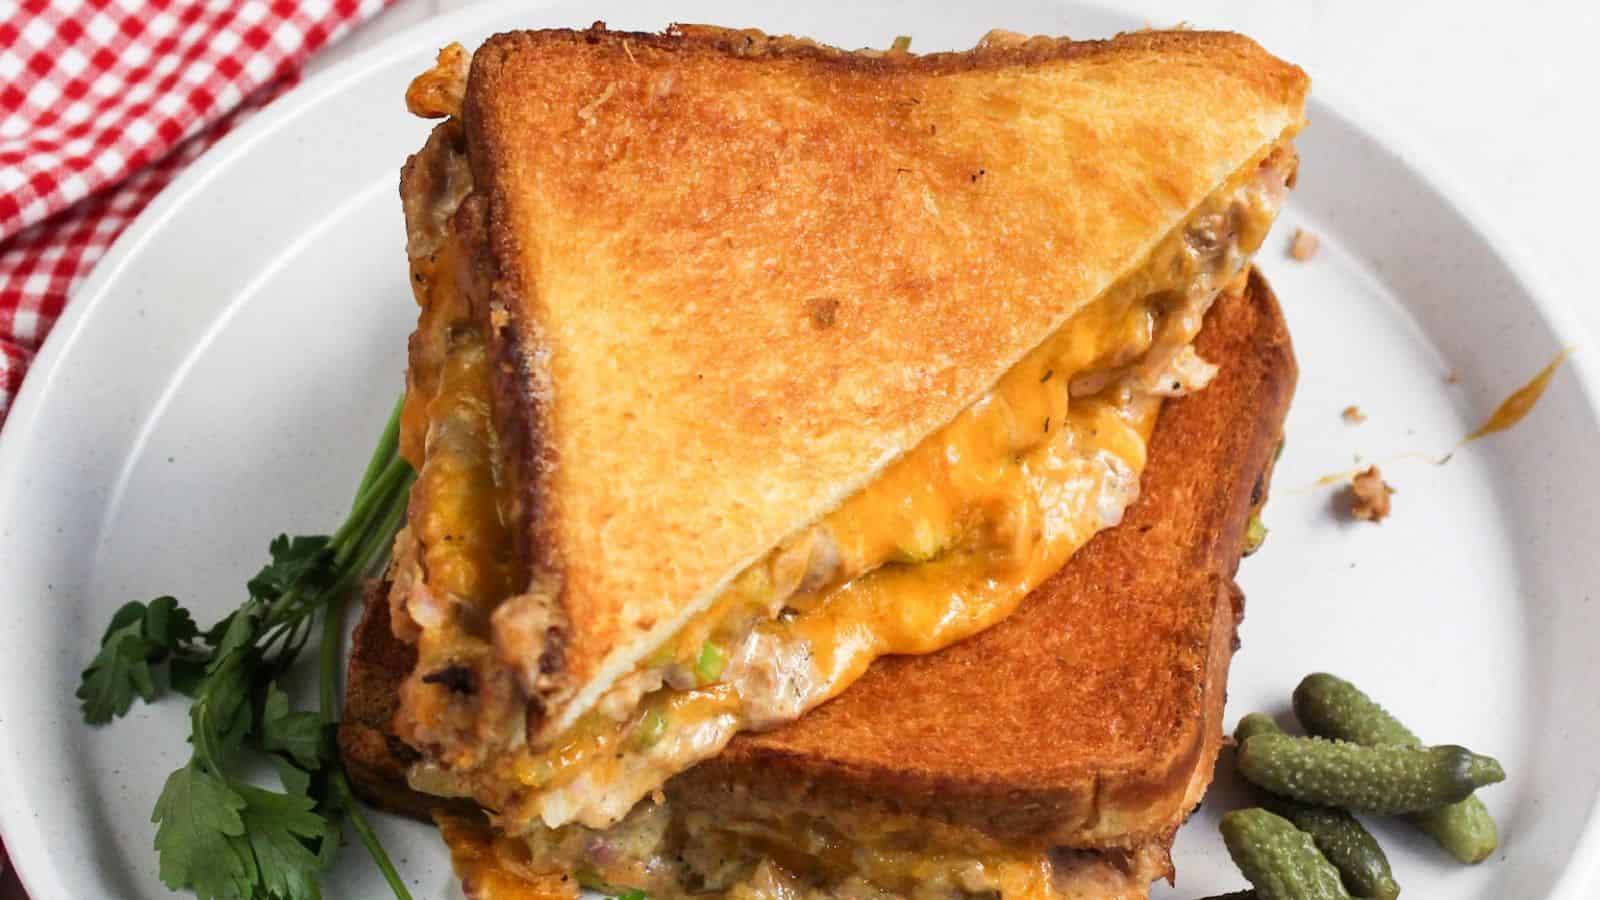 A grilled cheese tuna sandwich is cut in half on a plate.